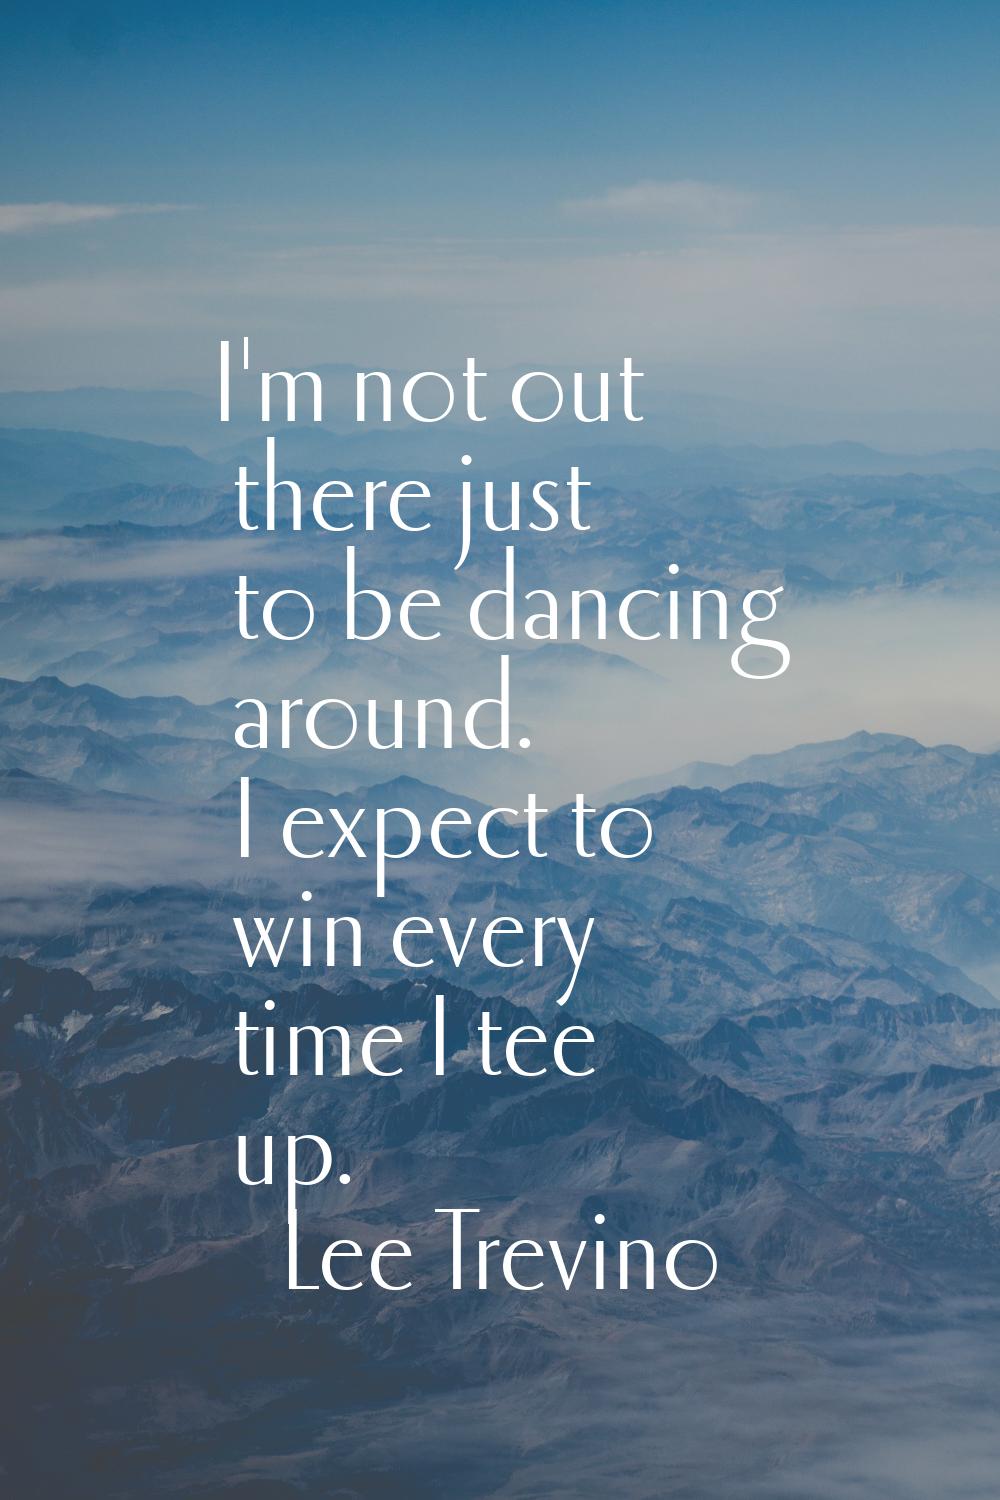 I'm not out there just to be dancing around. I expect to win every time I tee up.